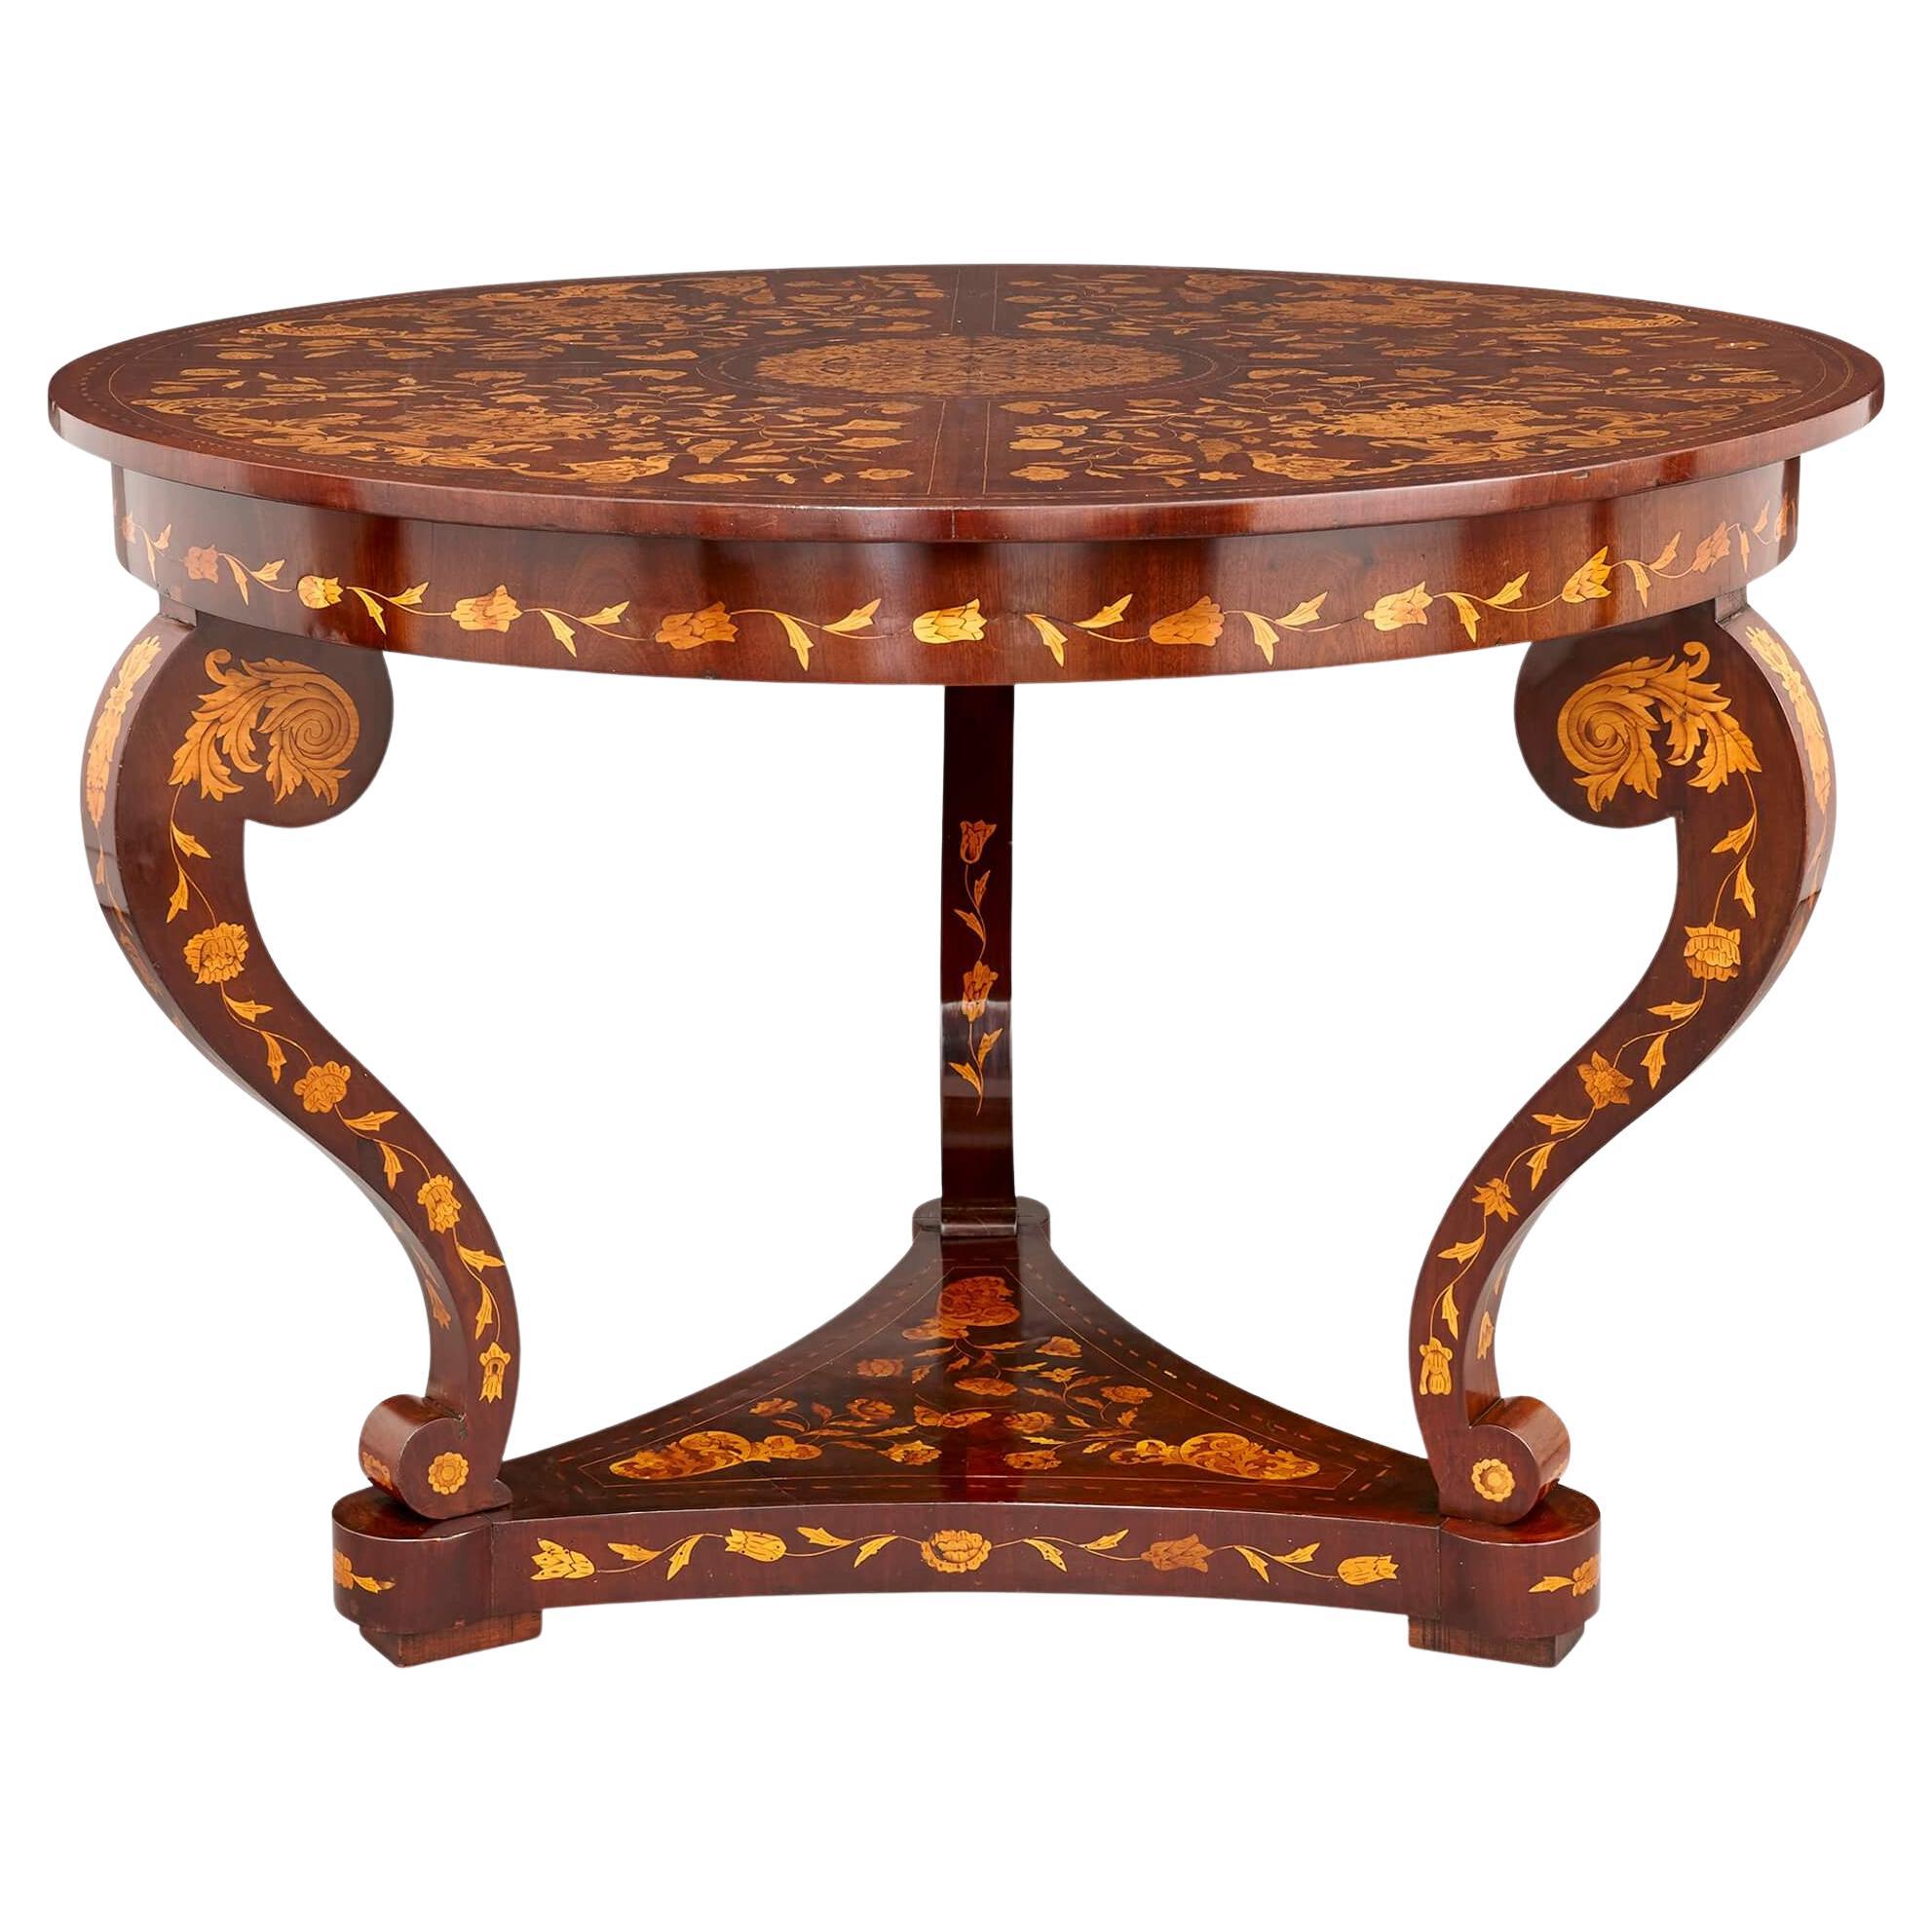 Antique French Circular Marquetry Table with Floral Inlay For Sale